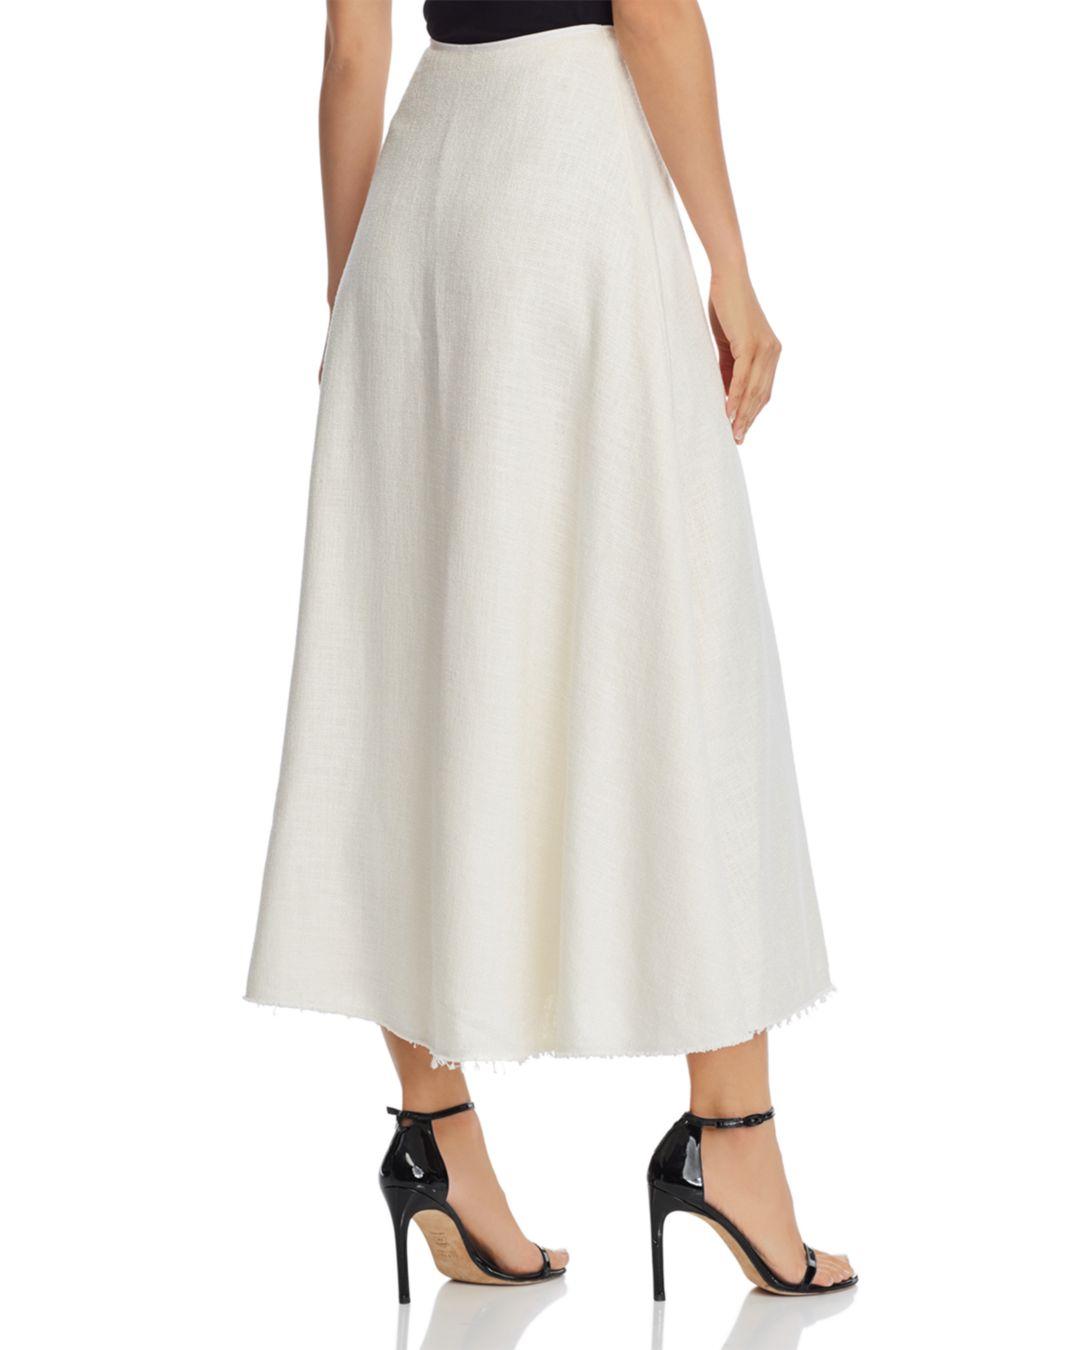 Theory Volume Canvas Skirt in White - Lyst